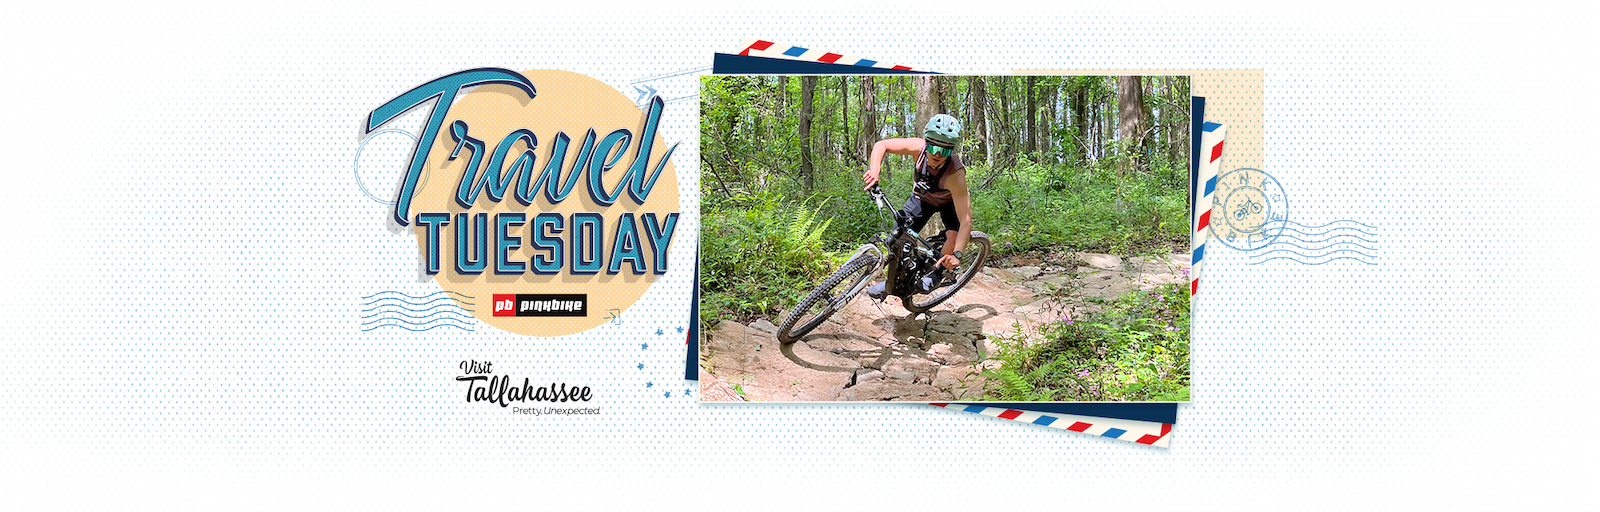 Winner Announced: Travel Tuesday - Enter to Win a Trip to Tallahassee,  Florida - Pinkbike